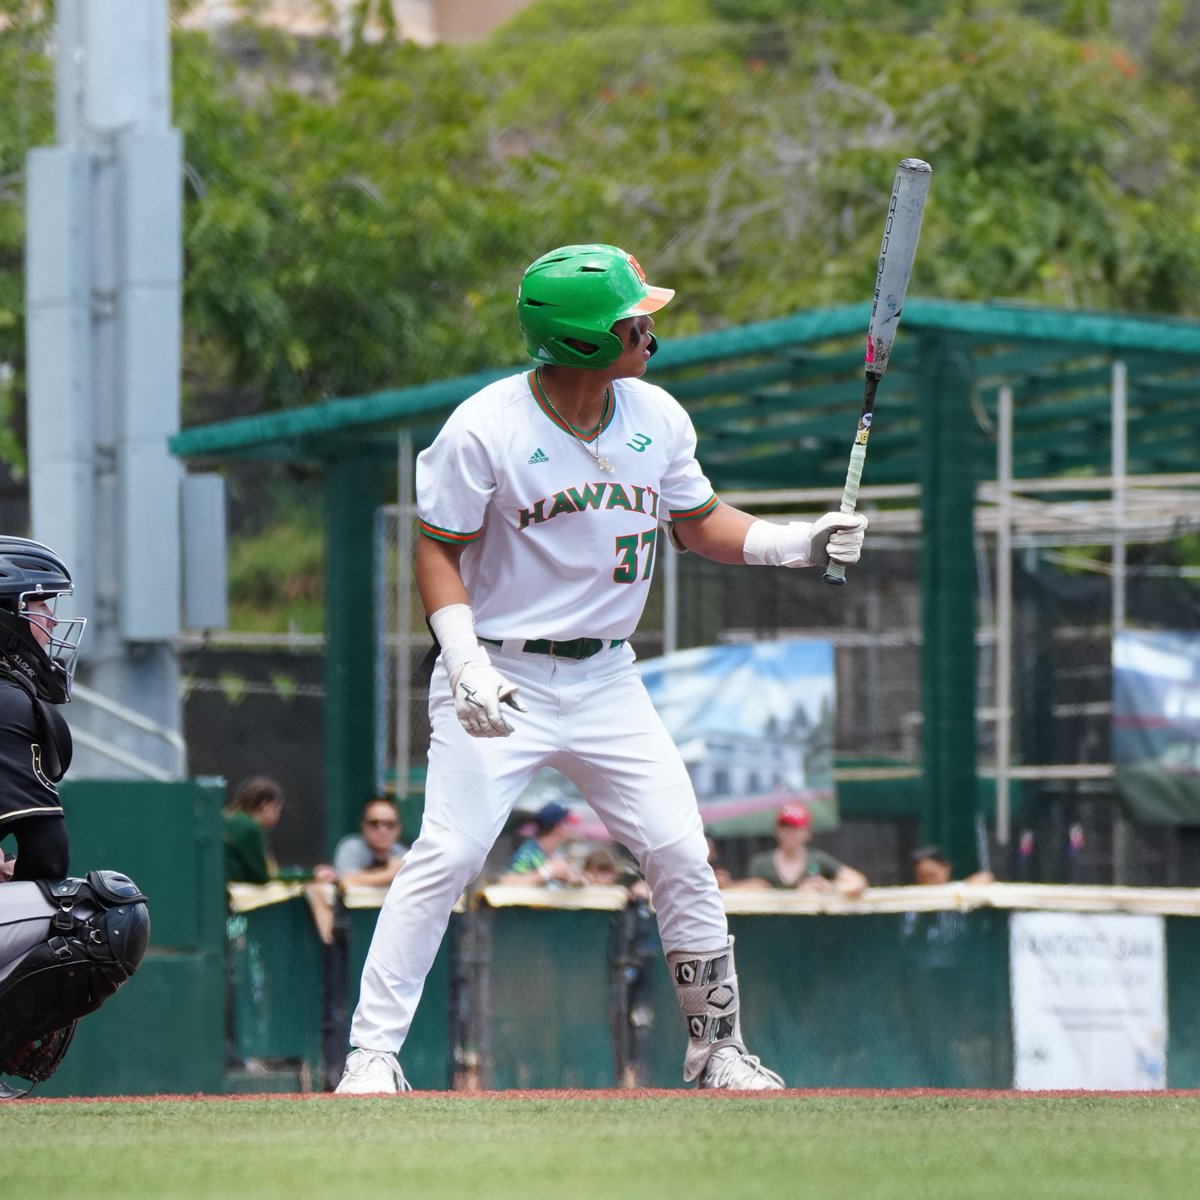 WOOOOO!!!! @matt_miura comes around to score from second on a wild pitch and we're tied up at four in the ninth! #GoBows